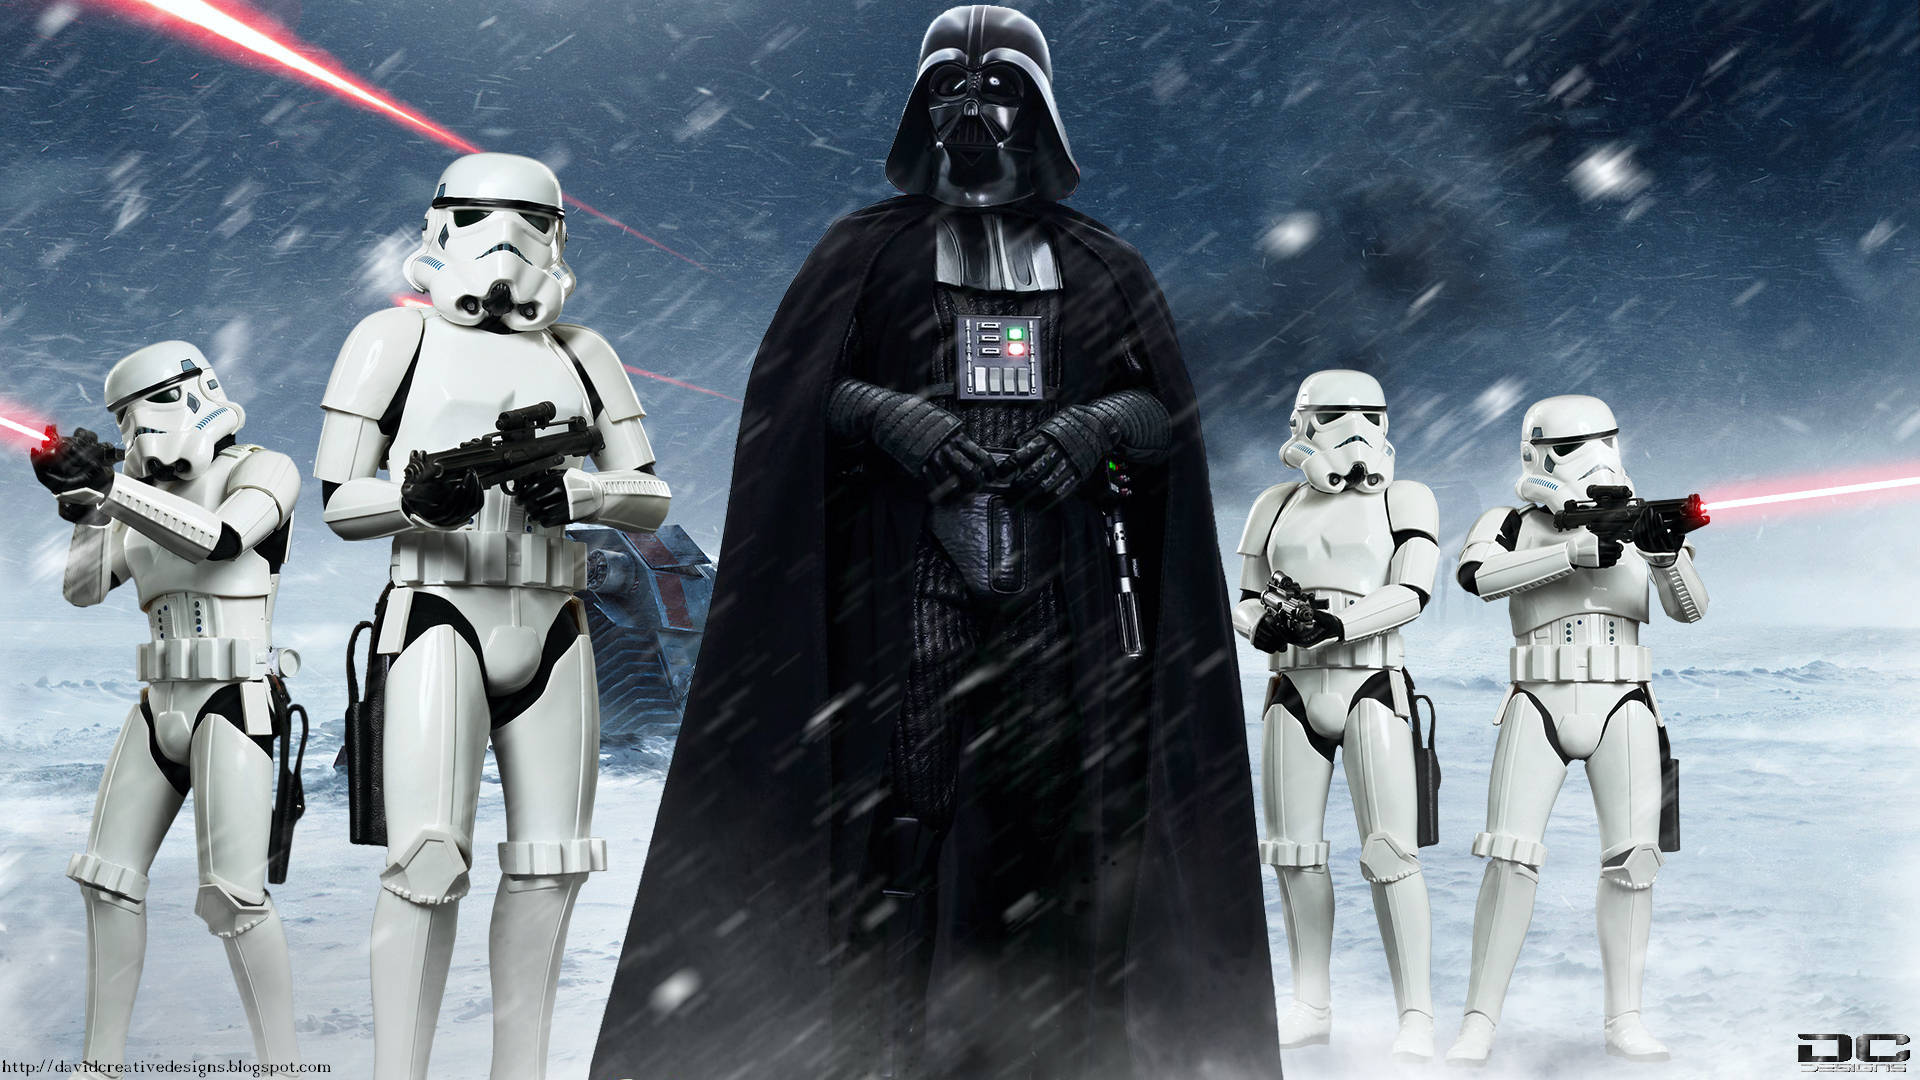 Darth Vader And Stormtroopers In Snowy Star Wars Landscape Wallpaper